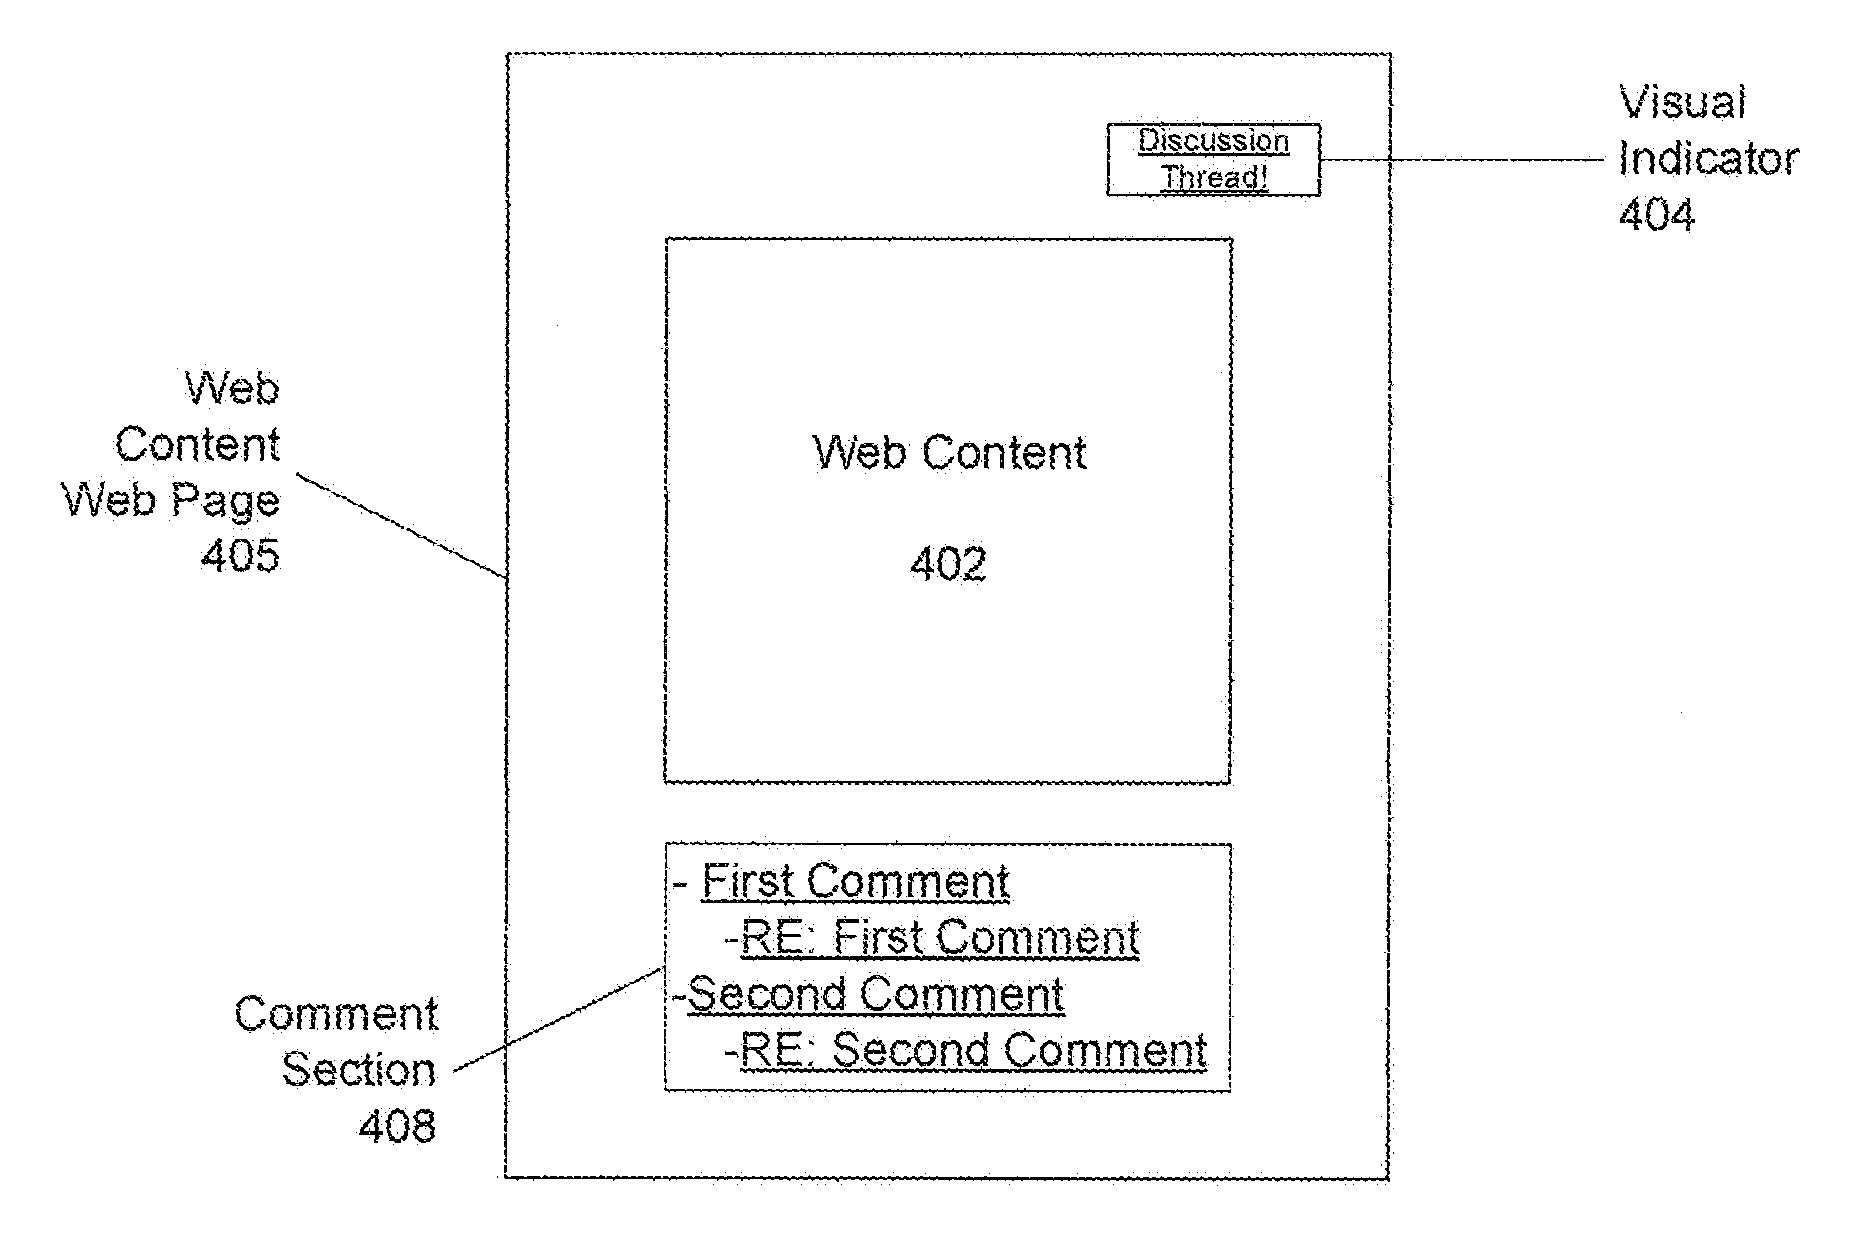 System and method for auto-generating threads on web forums